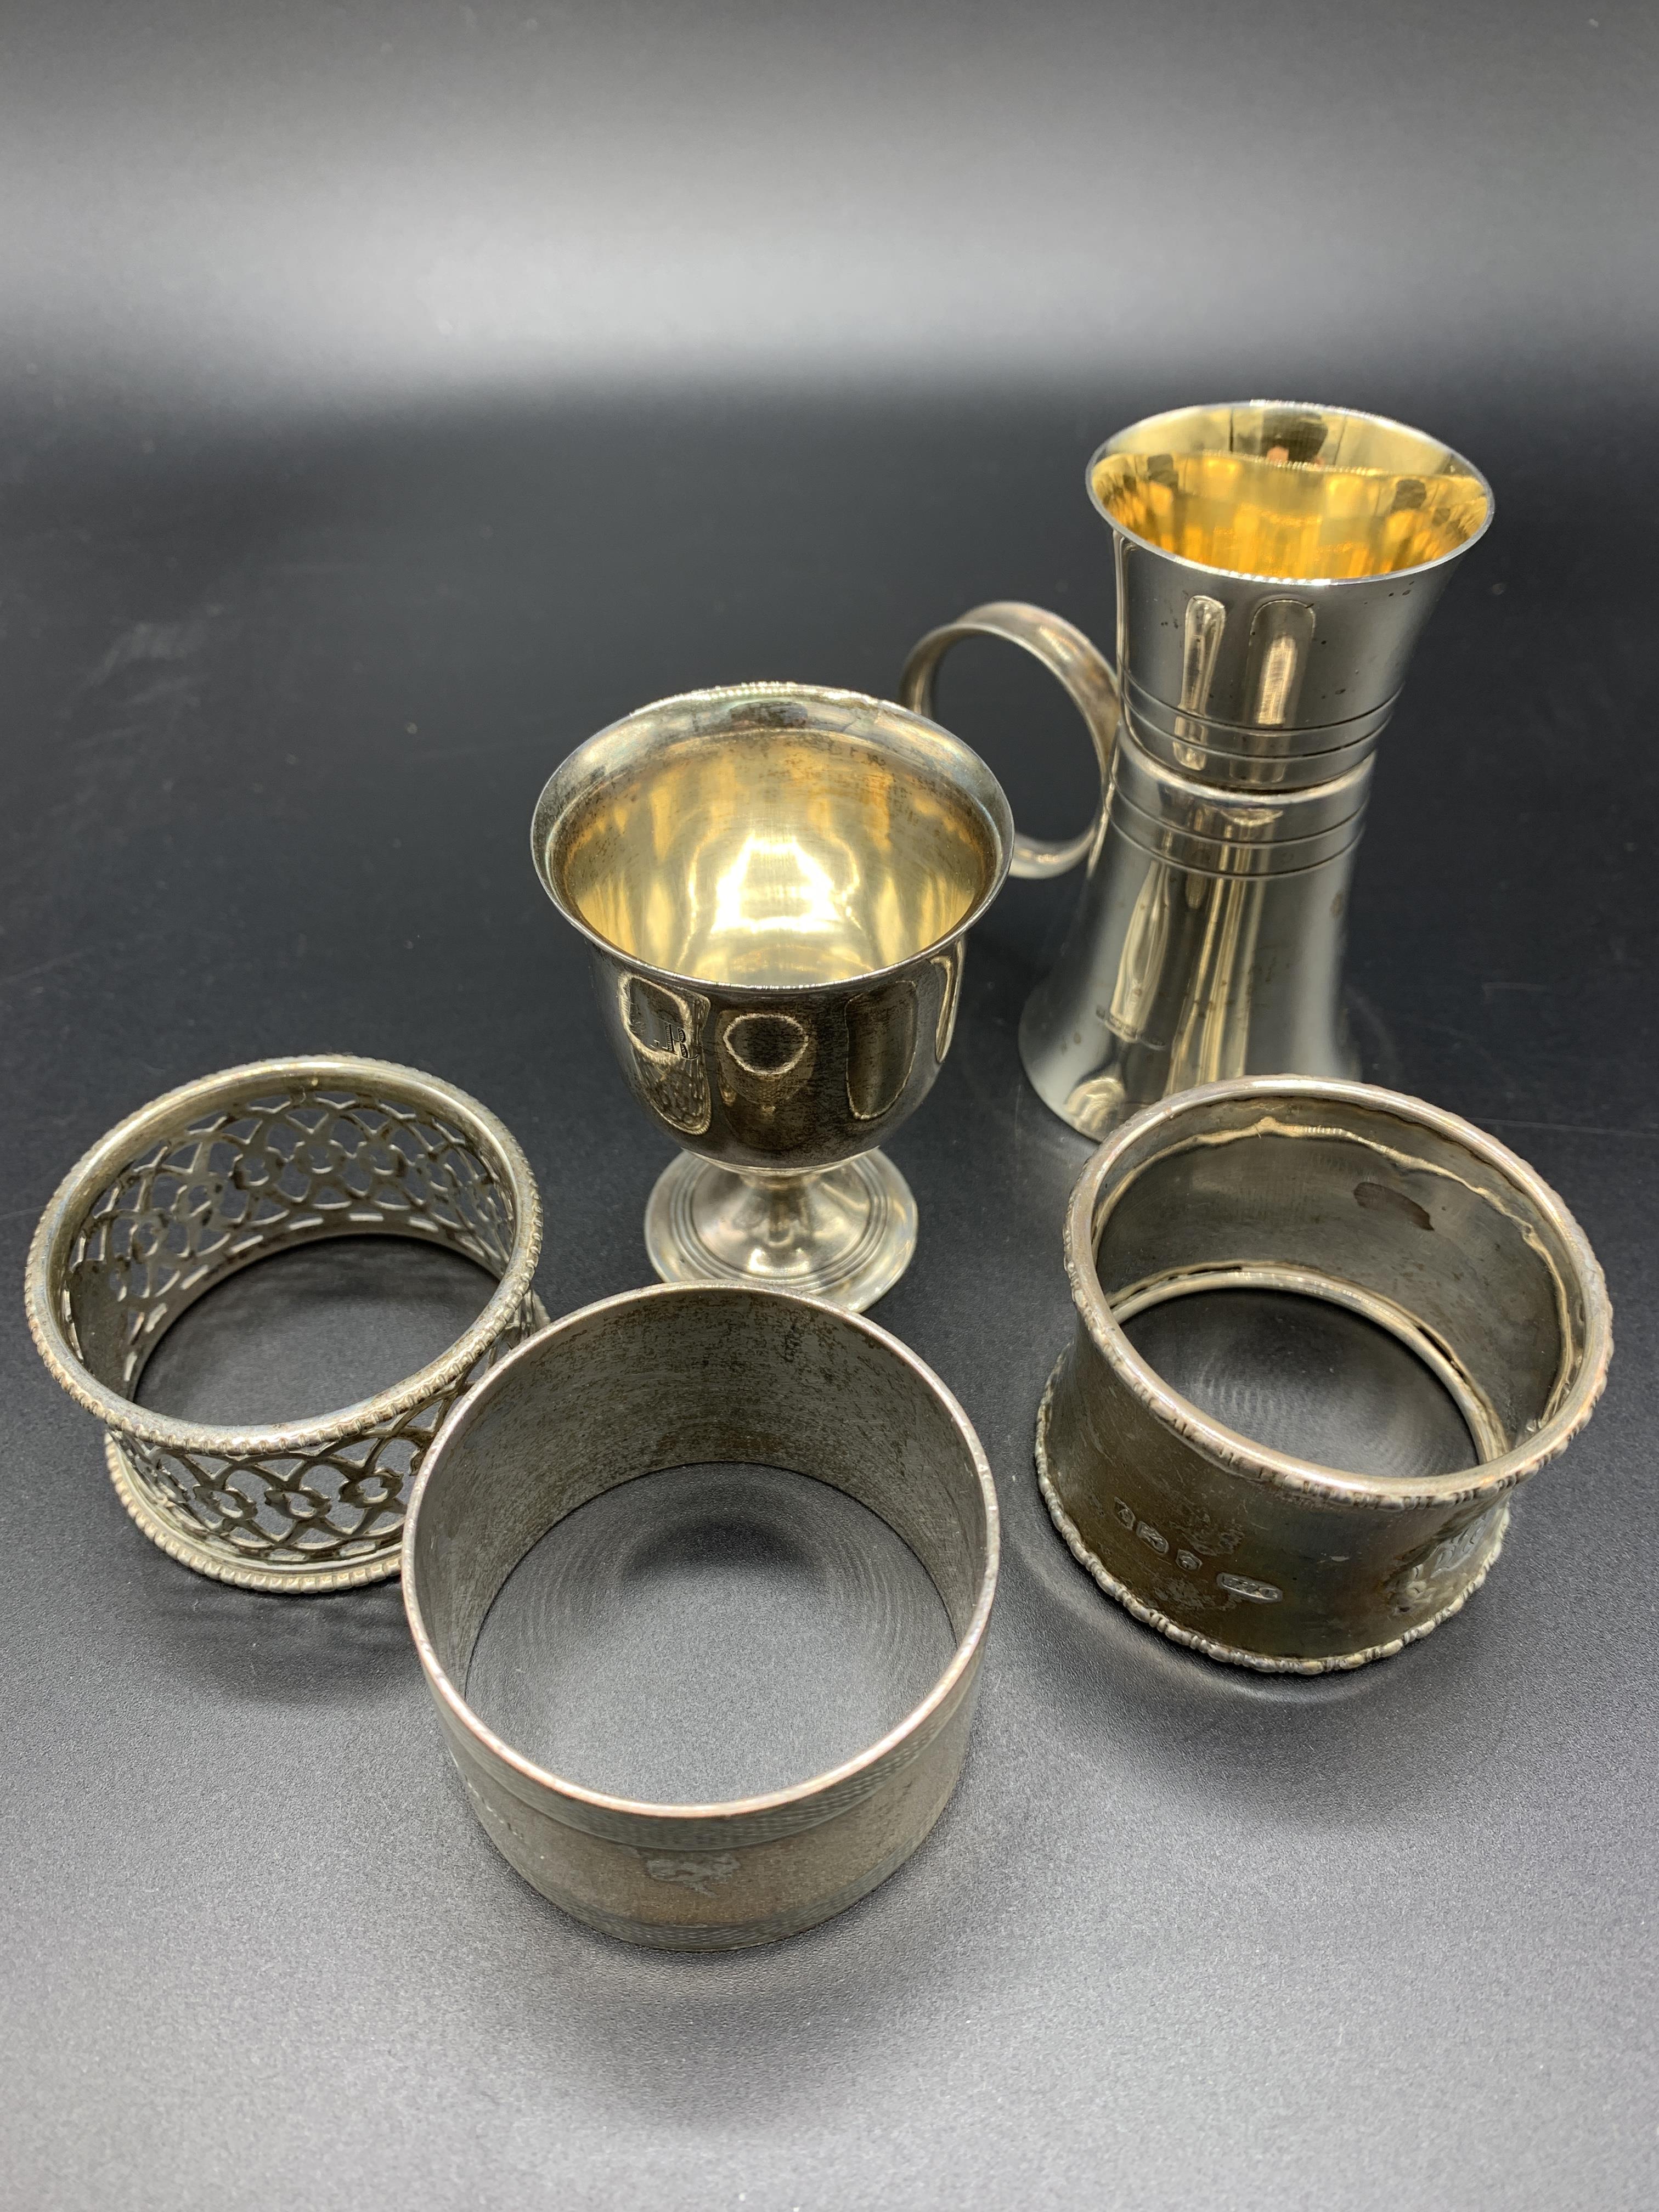 A hallmarked silver and gilt drinks measure, a silver egg cup, and three silver napkin rings